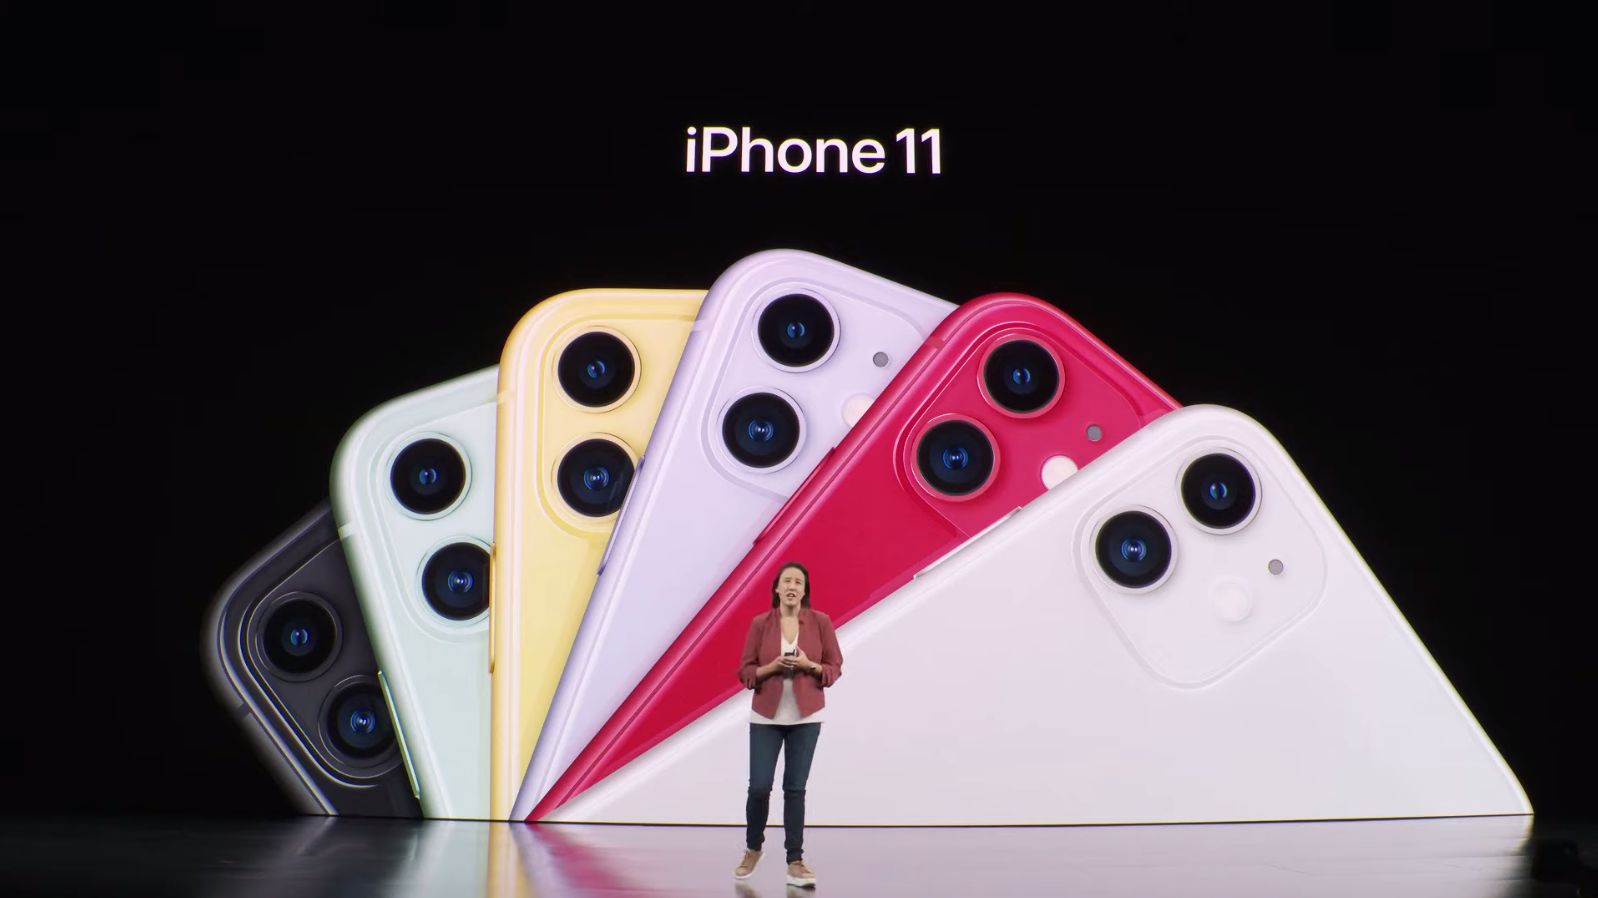 The iPhone 11 comes in six colors. (Picture: Screenshot from Apple’s September 2019 keynote)